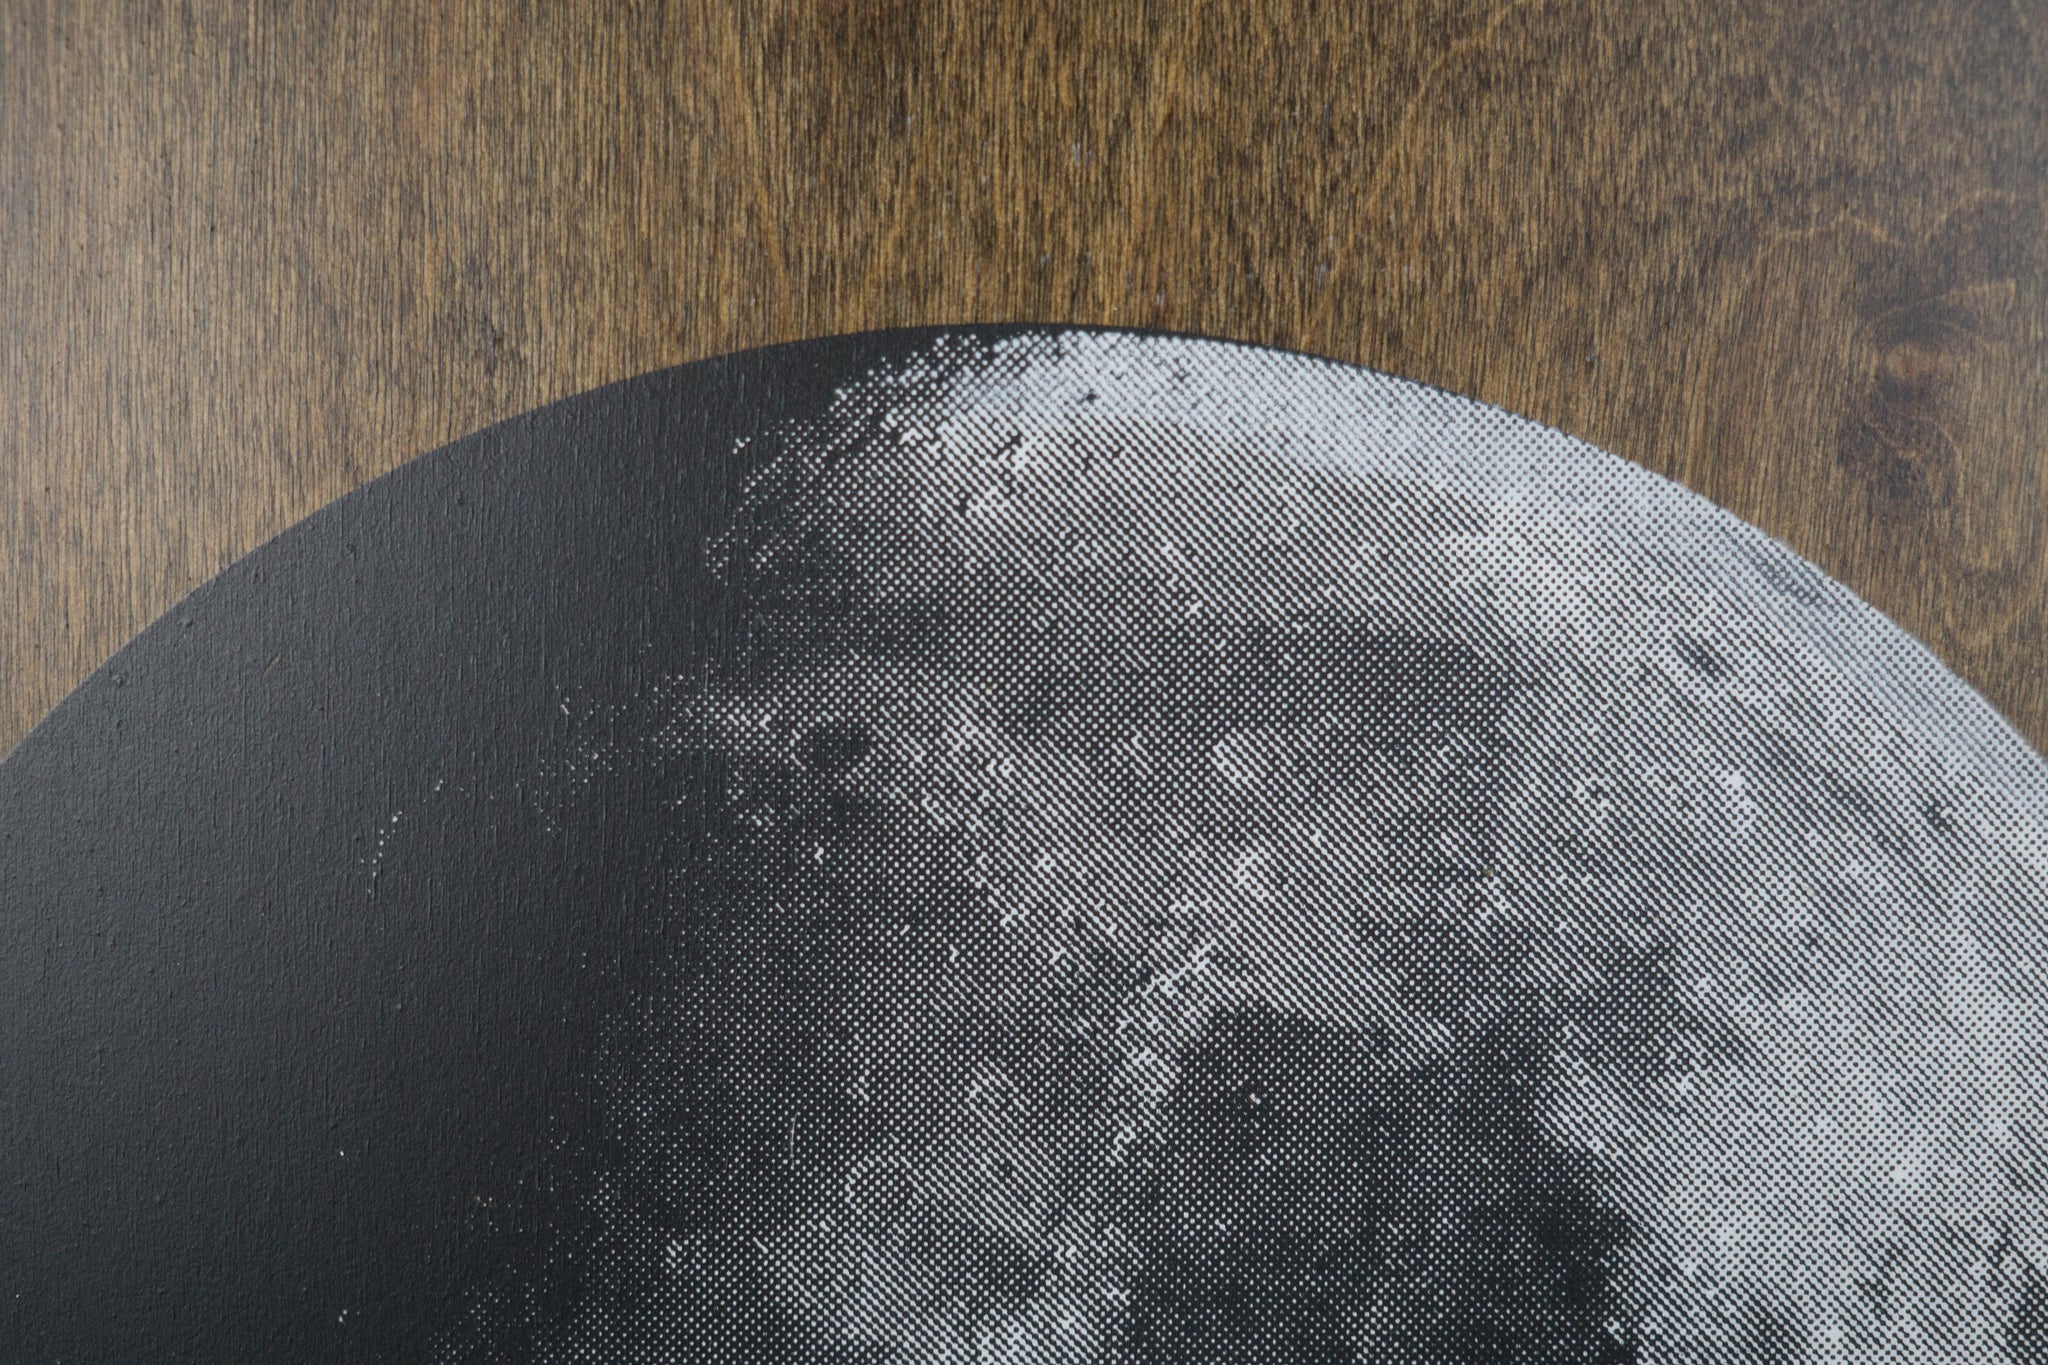 Moon on Stained Birch Plywood